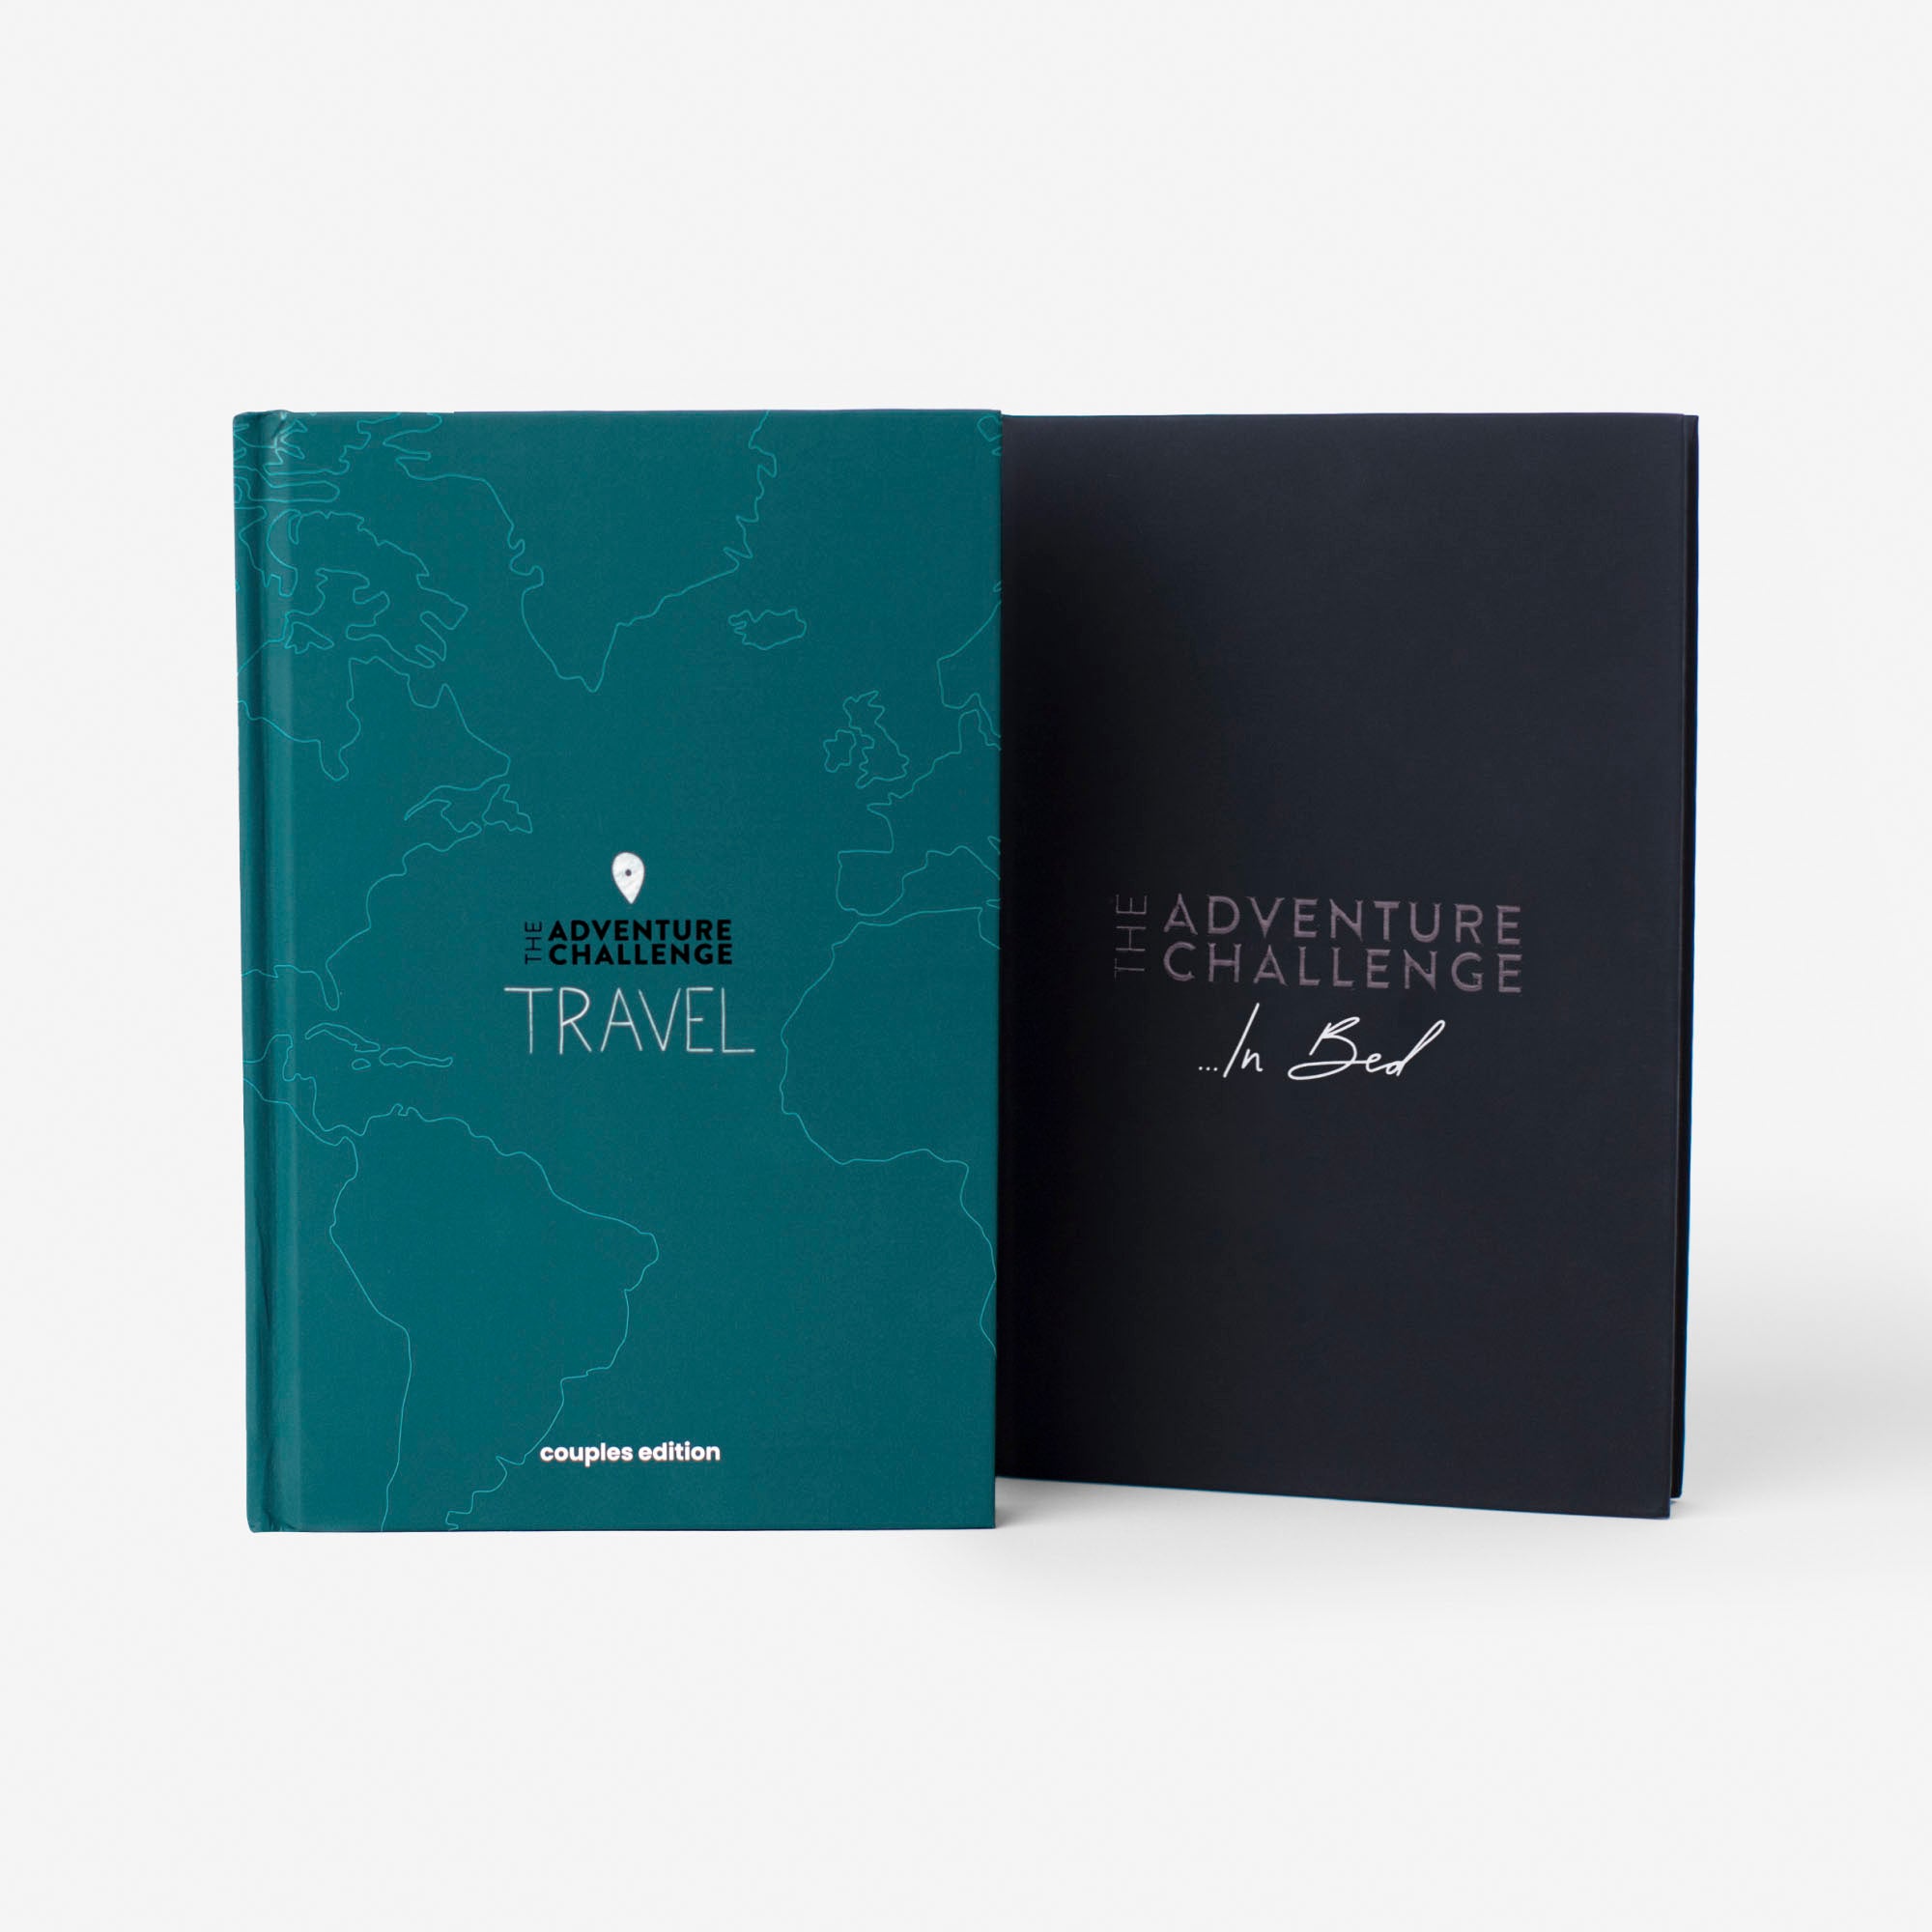 Travel and ...In Bed Edition Bundle